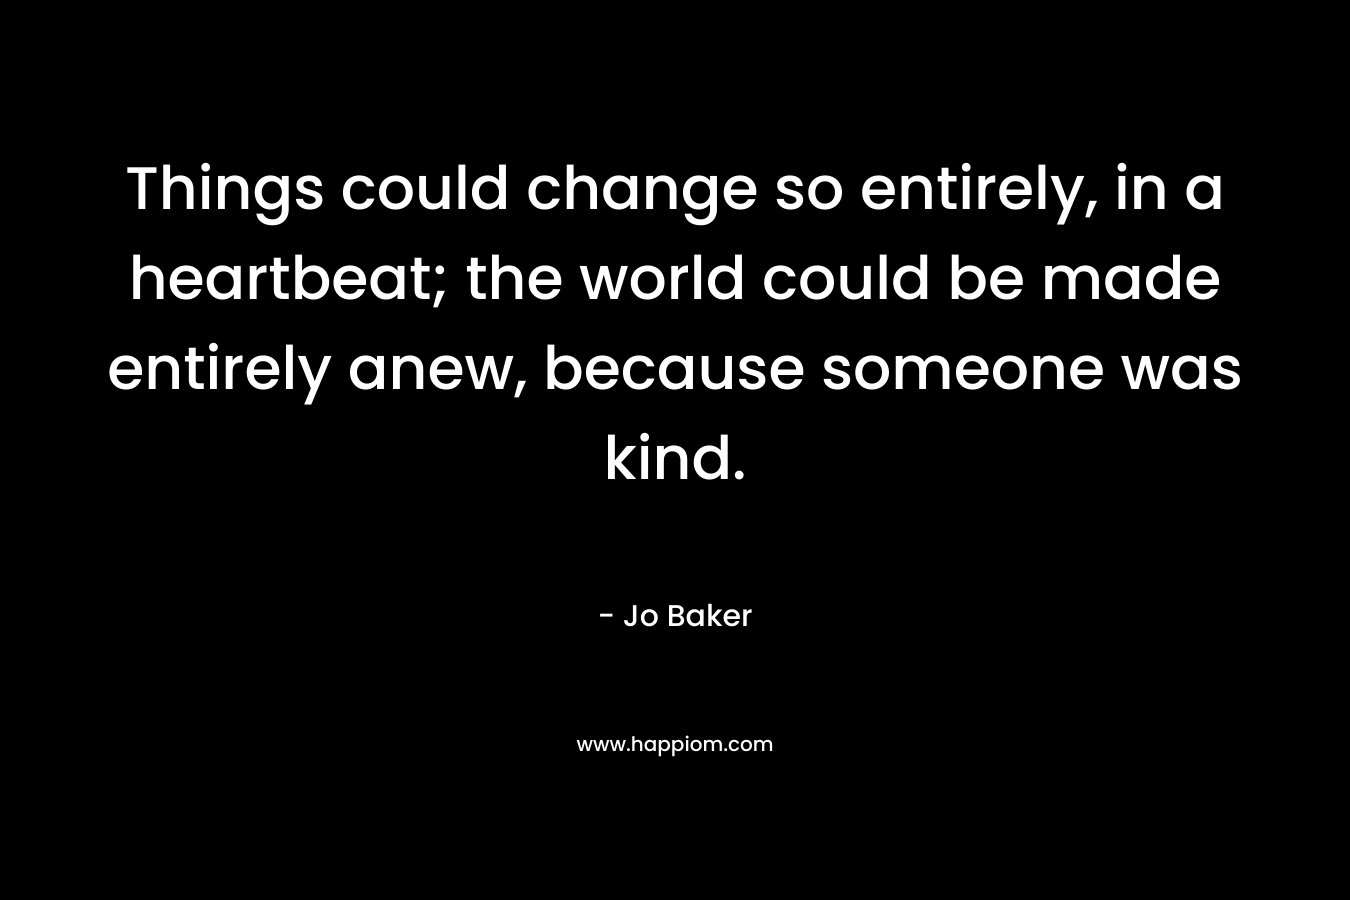 Things could change so entirely, in a heartbeat; the world could be made entirely anew, because someone was kind. – Jo Baker